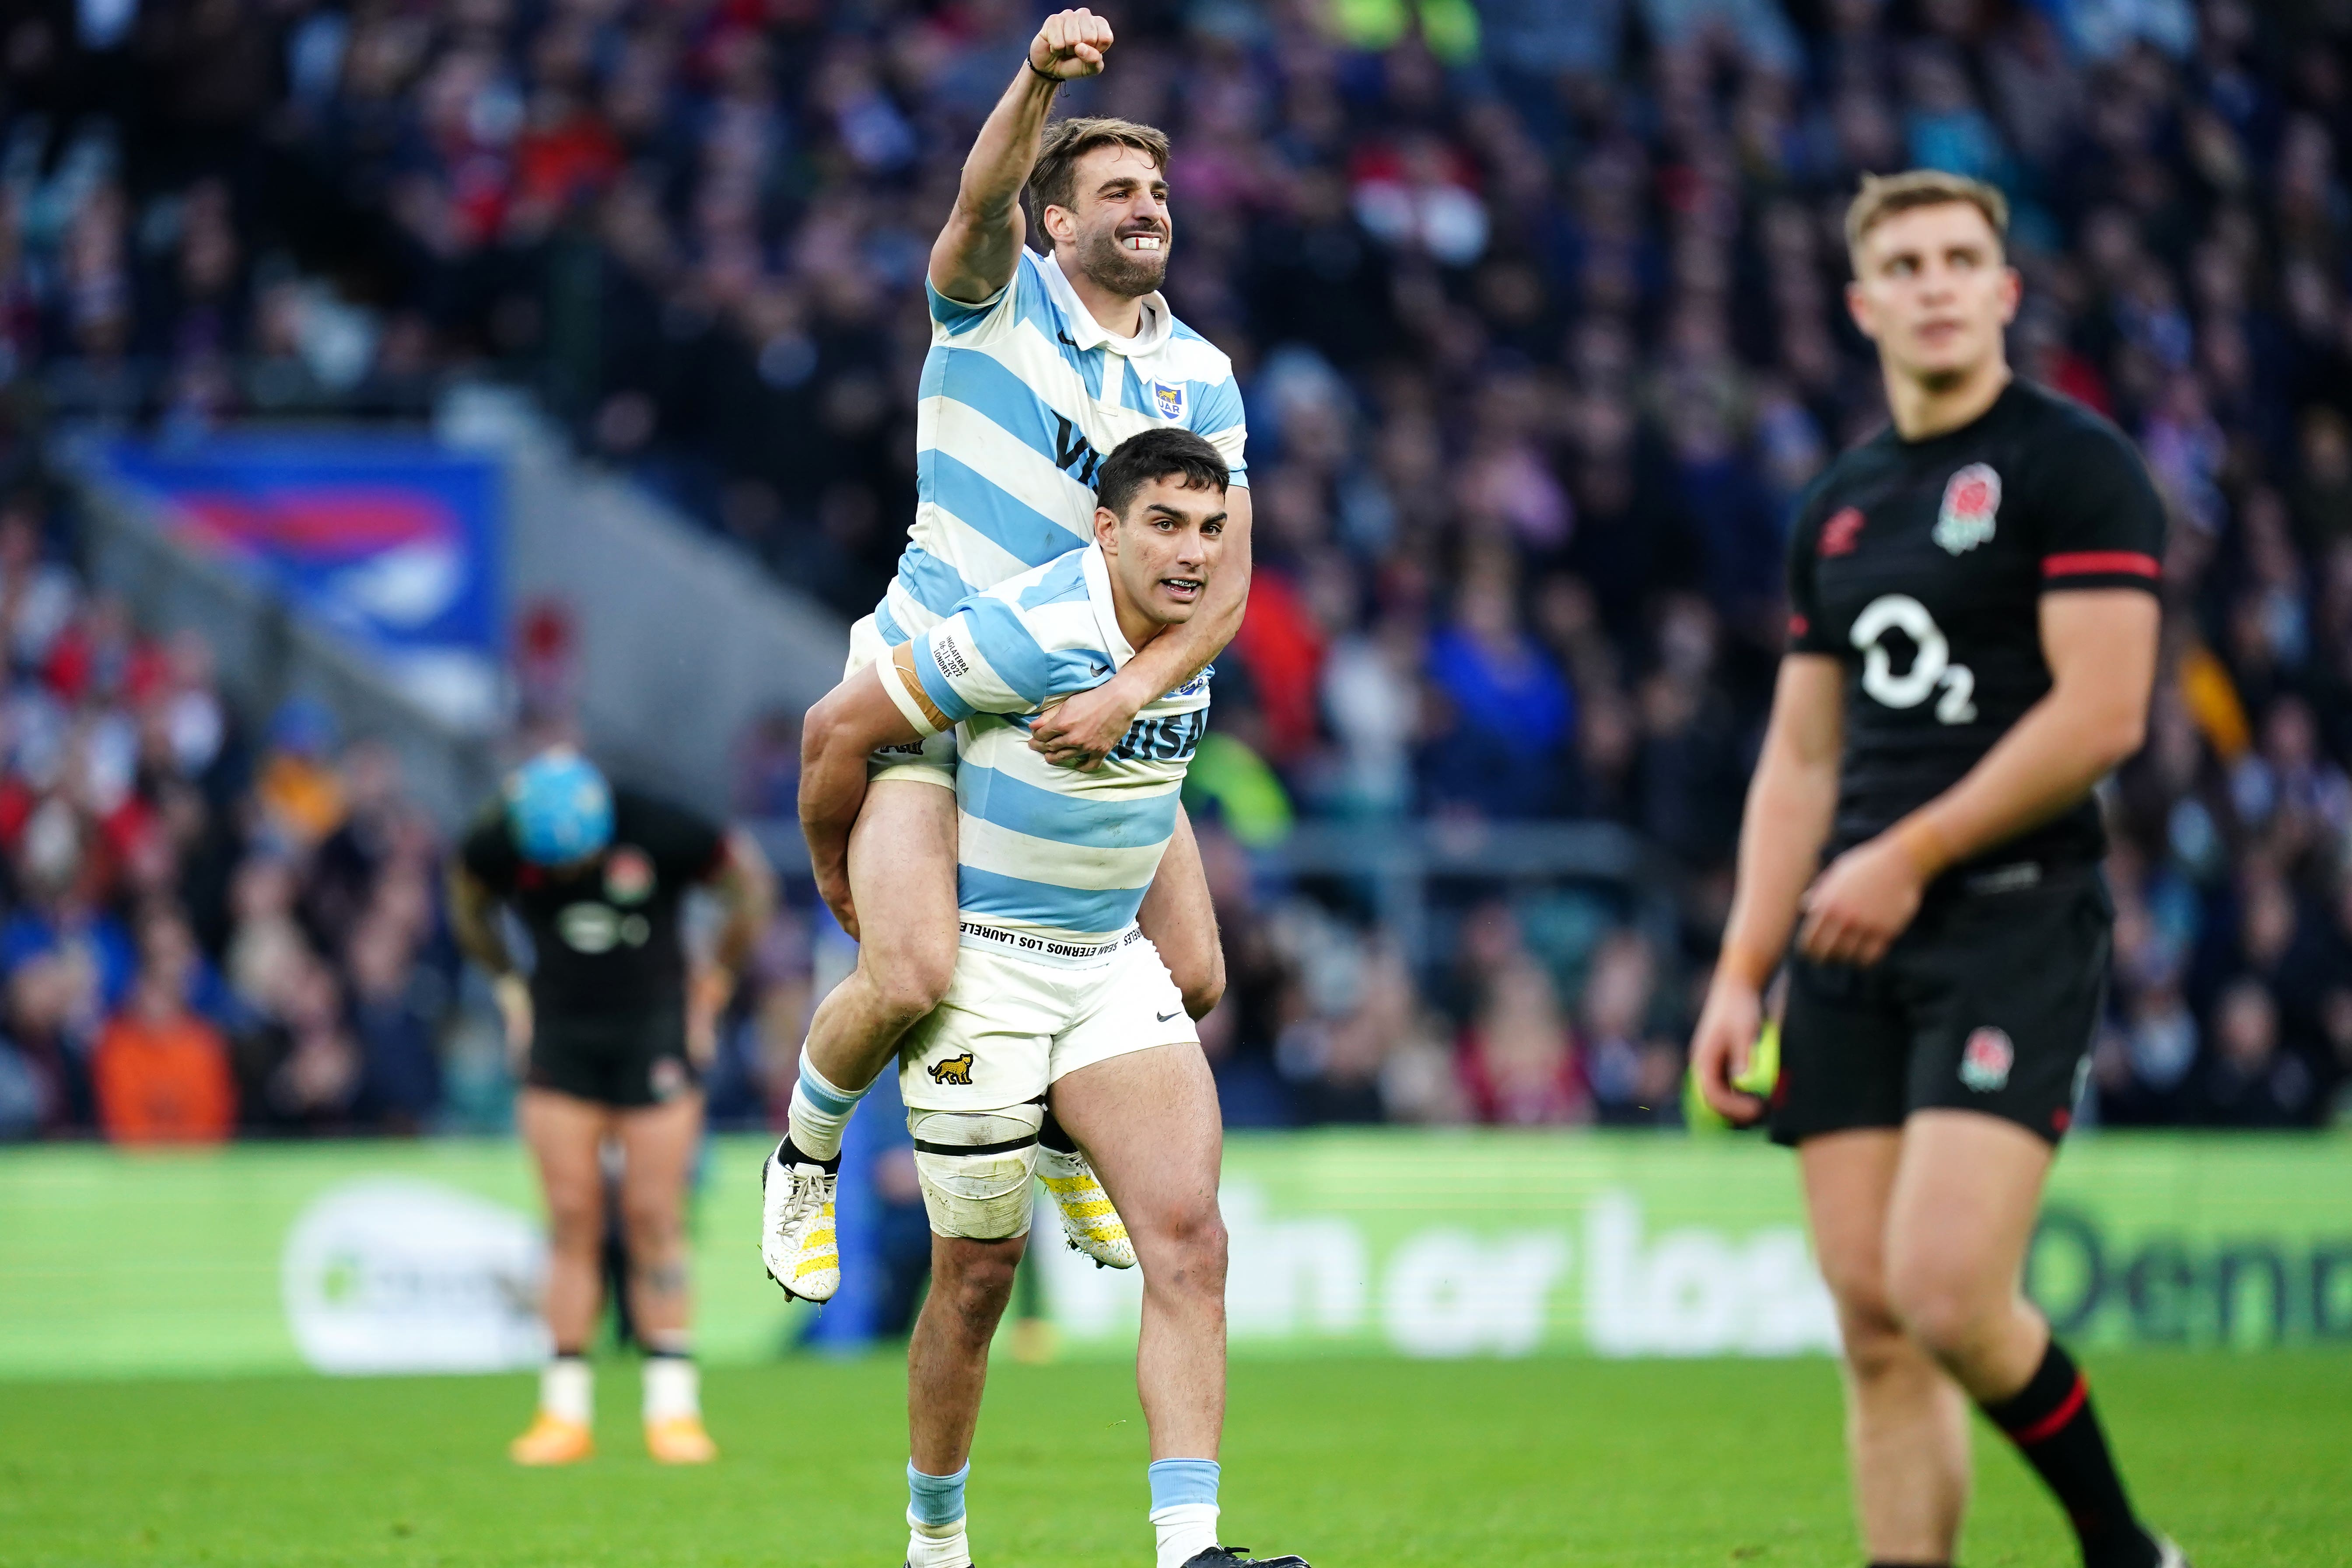 Argentina won at Twickenham for just the second time in their history